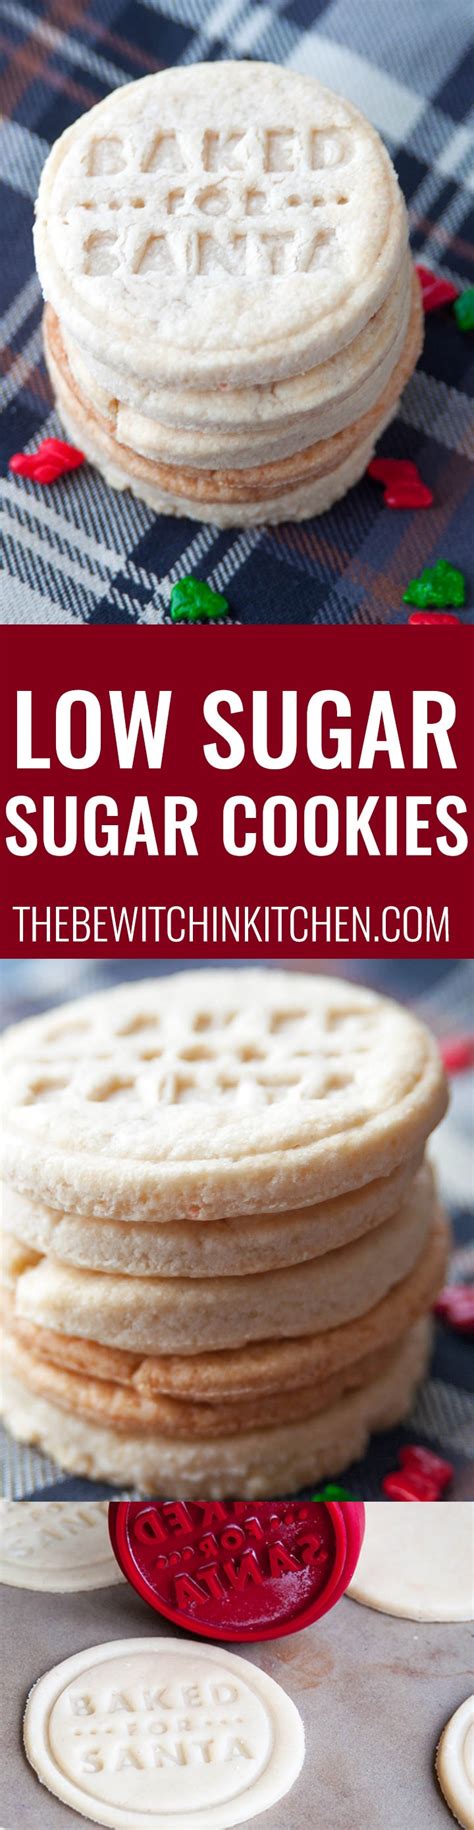 Member recipes for low fat and low sugar cookies. Low Sugar Cookies Recipe | The Bewitchin' Kitchen